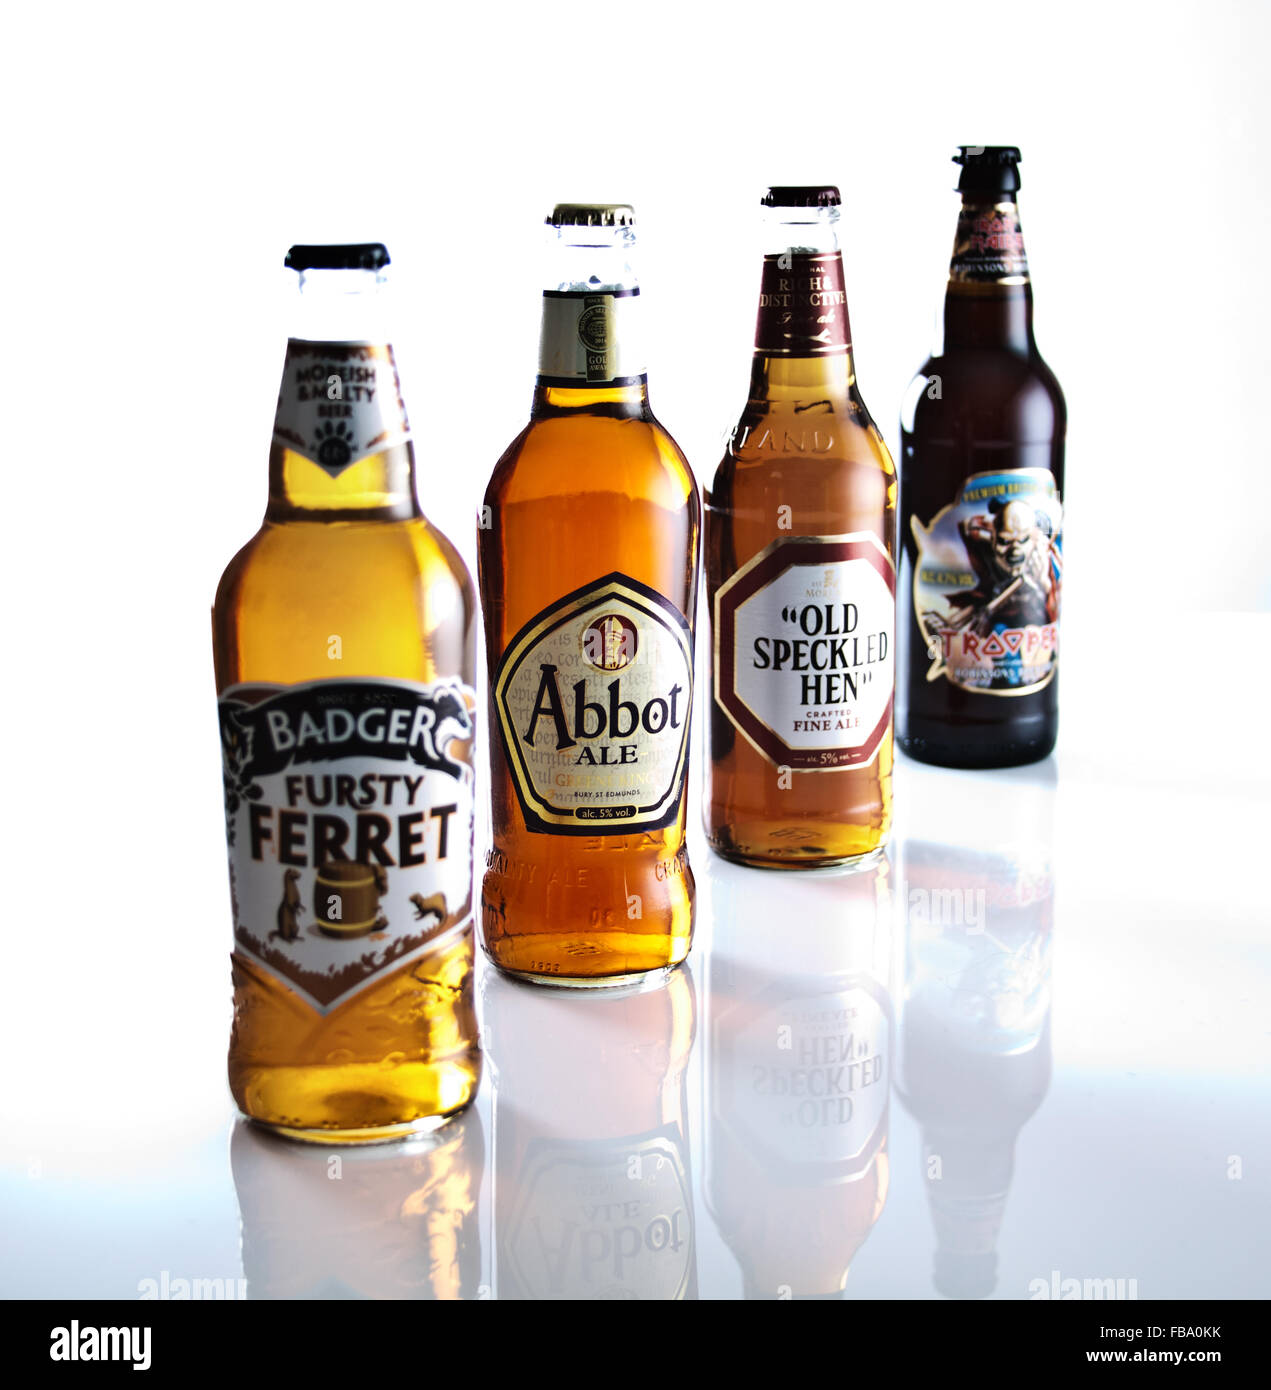 Four colourful beer bottles arranged to show depth of field and emphasise brand Stock Photo